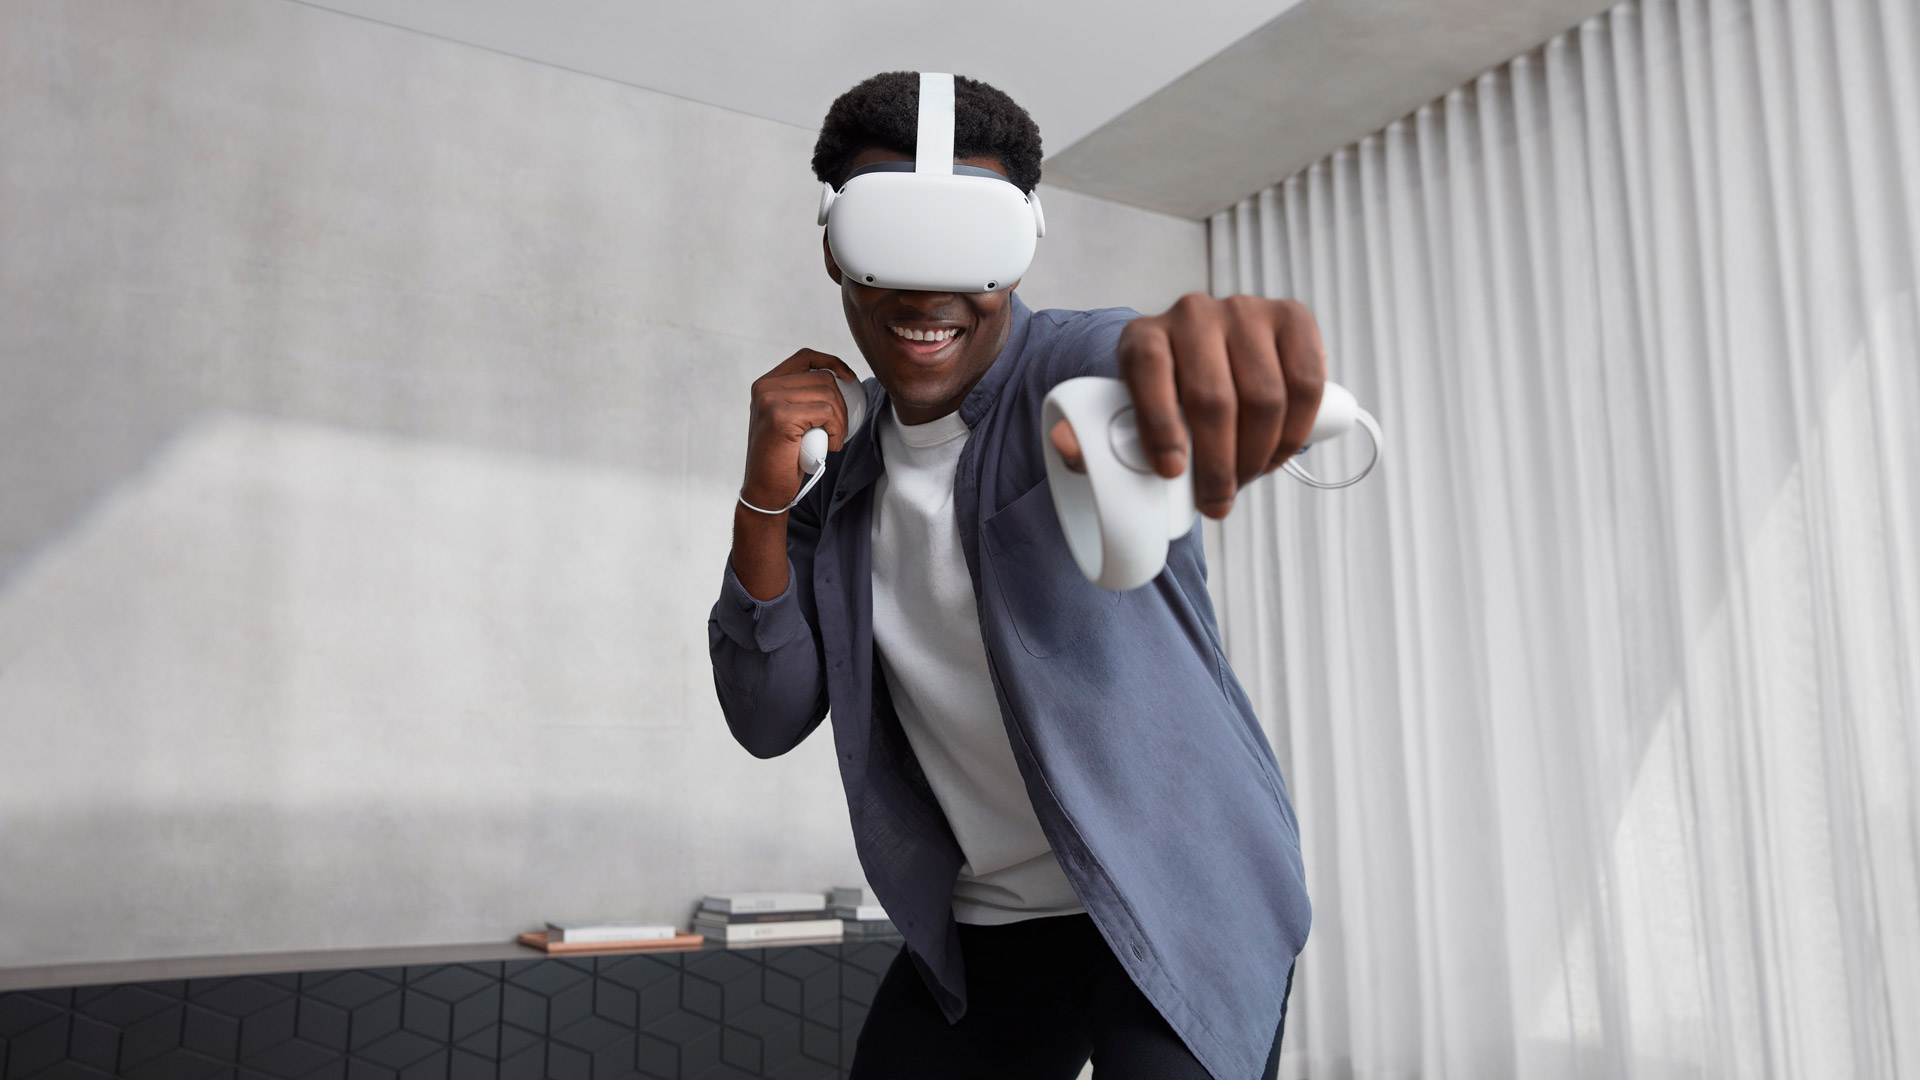 games for the oculus quest 2